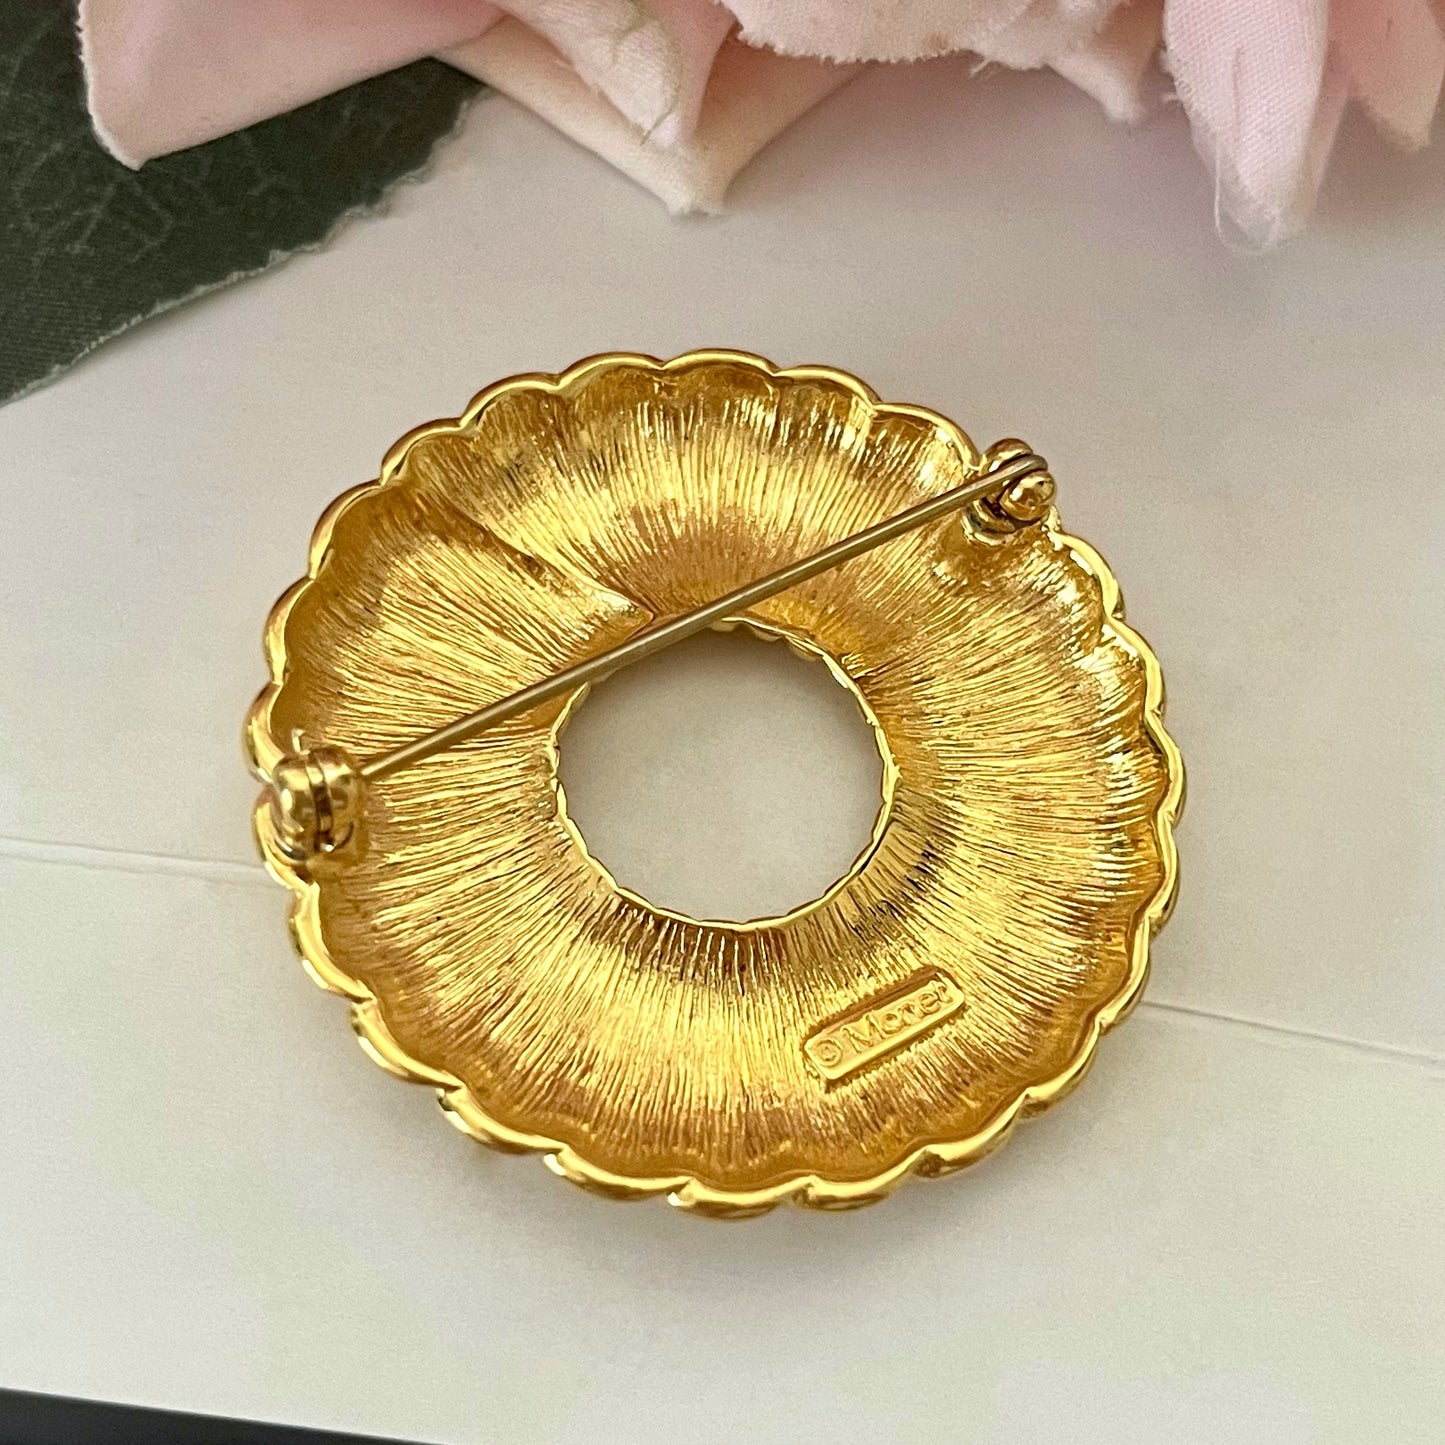 1980s Monet Gold Plated Circle Brooch